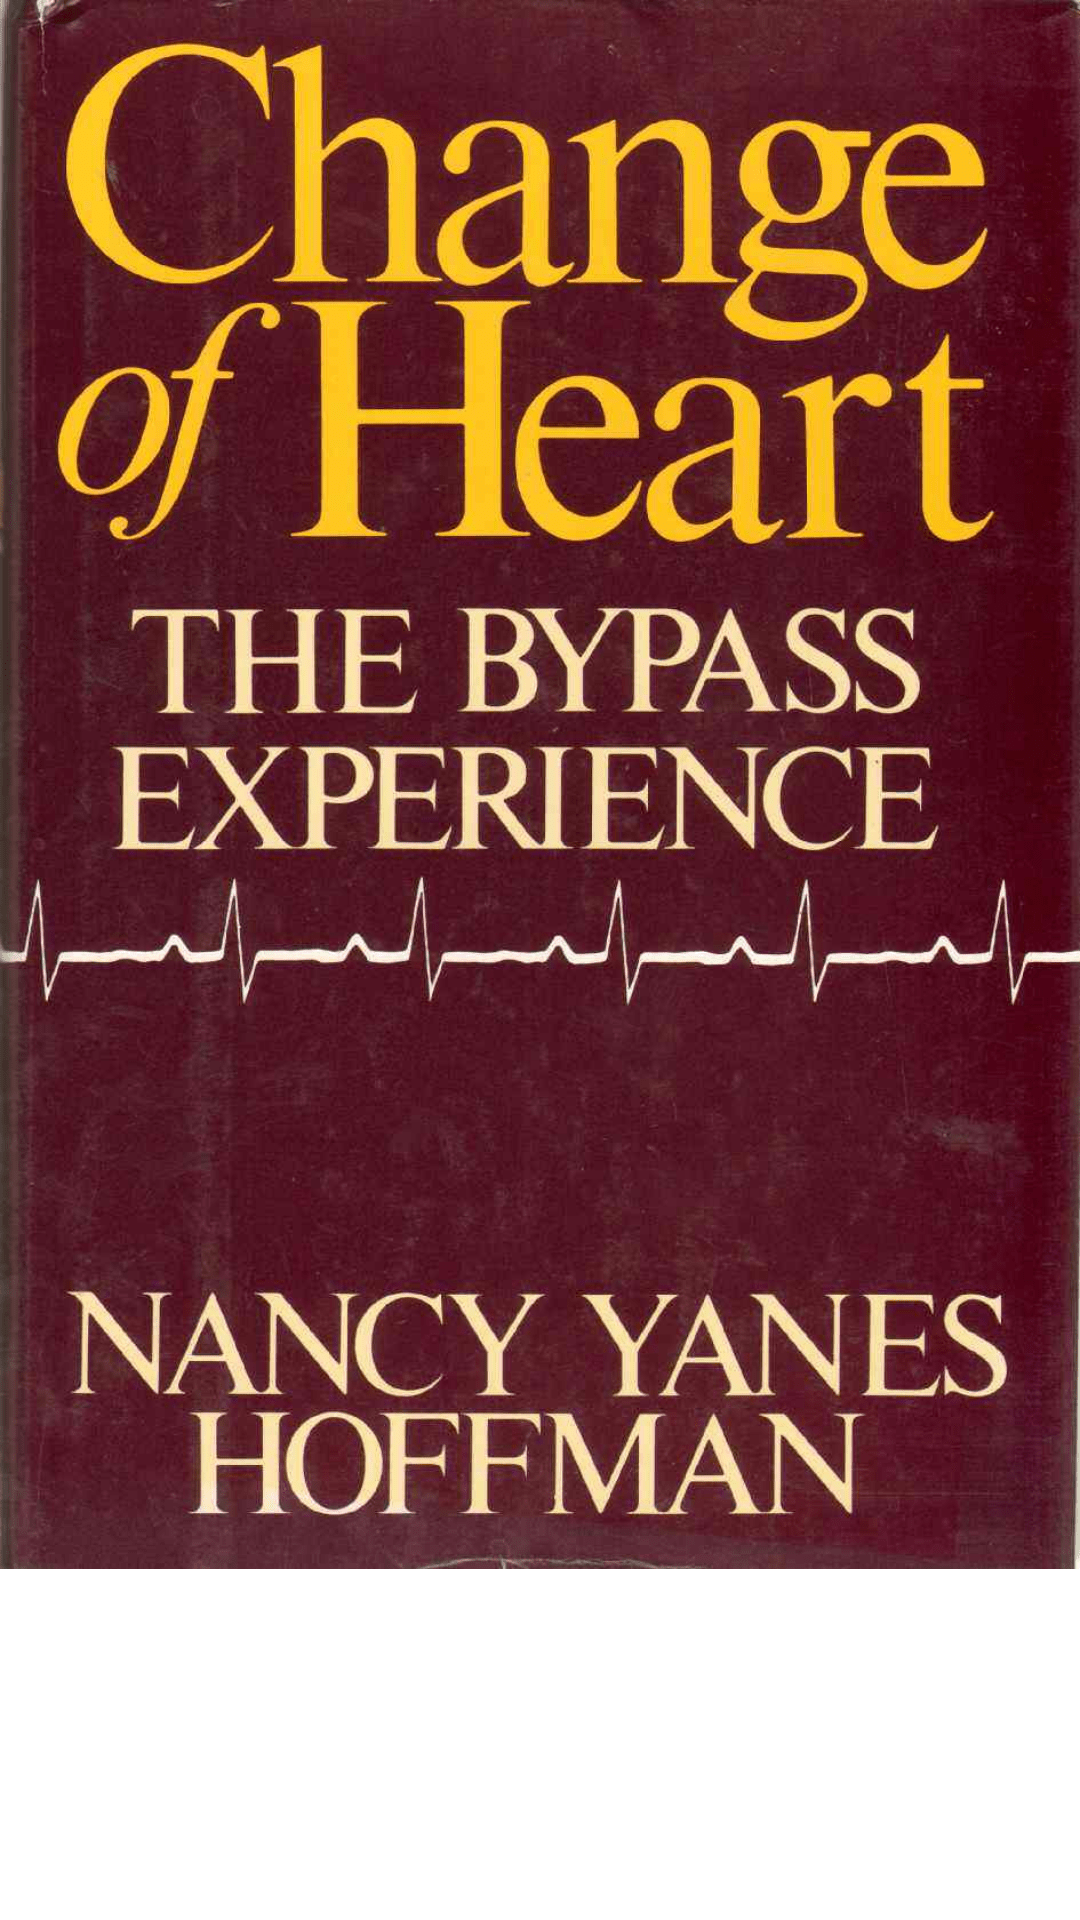 Change of Heart: The Bypass Experience